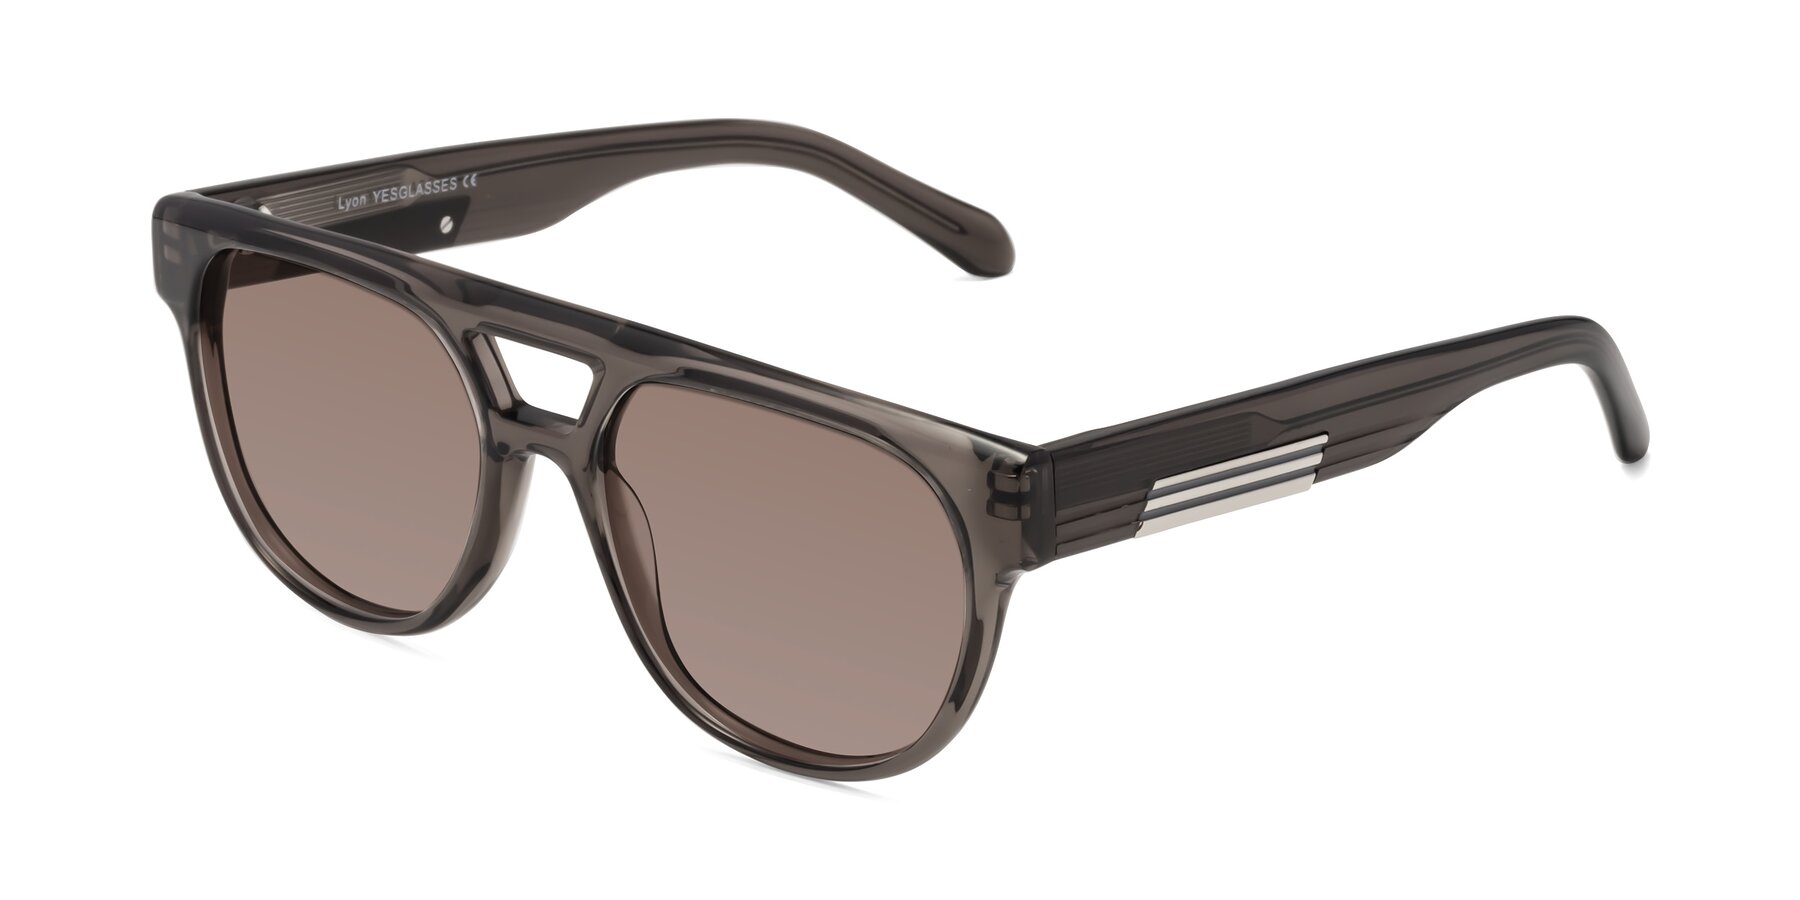 Angle of Lyon in Charcoal Gray with Medium Brown Tinted Lenses